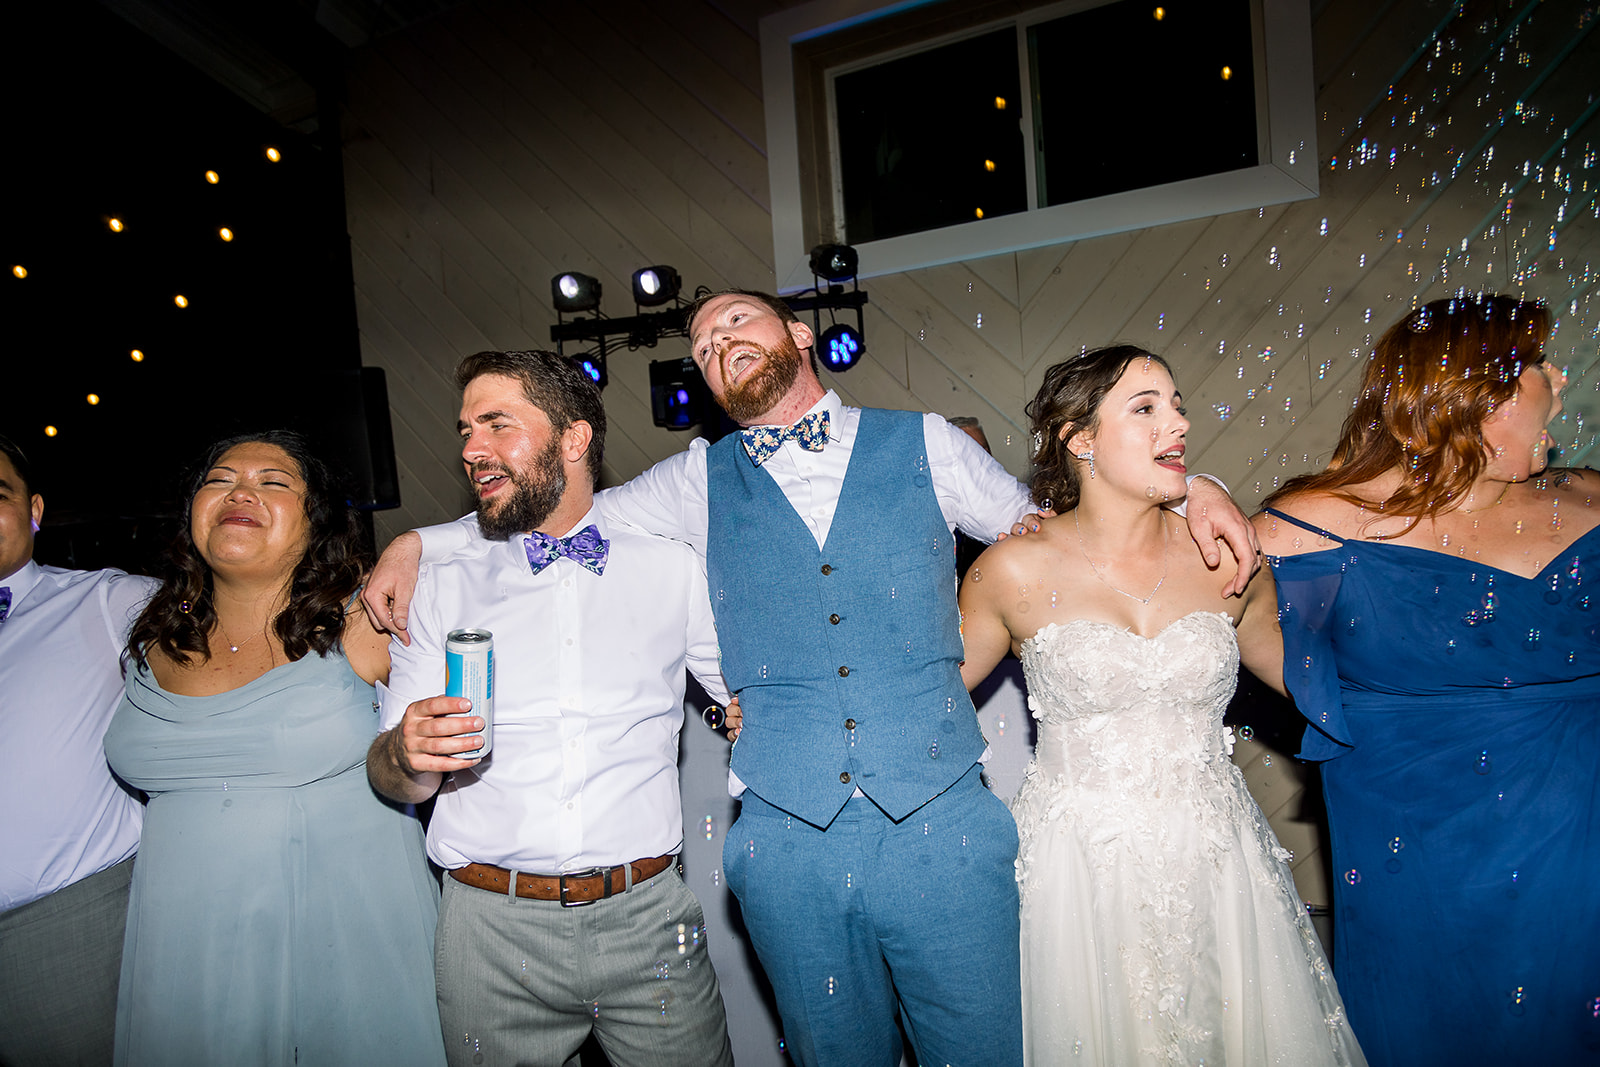 Lifelong friends surround the couple, creating a heartwarming circle of camaraderie on the dance floor